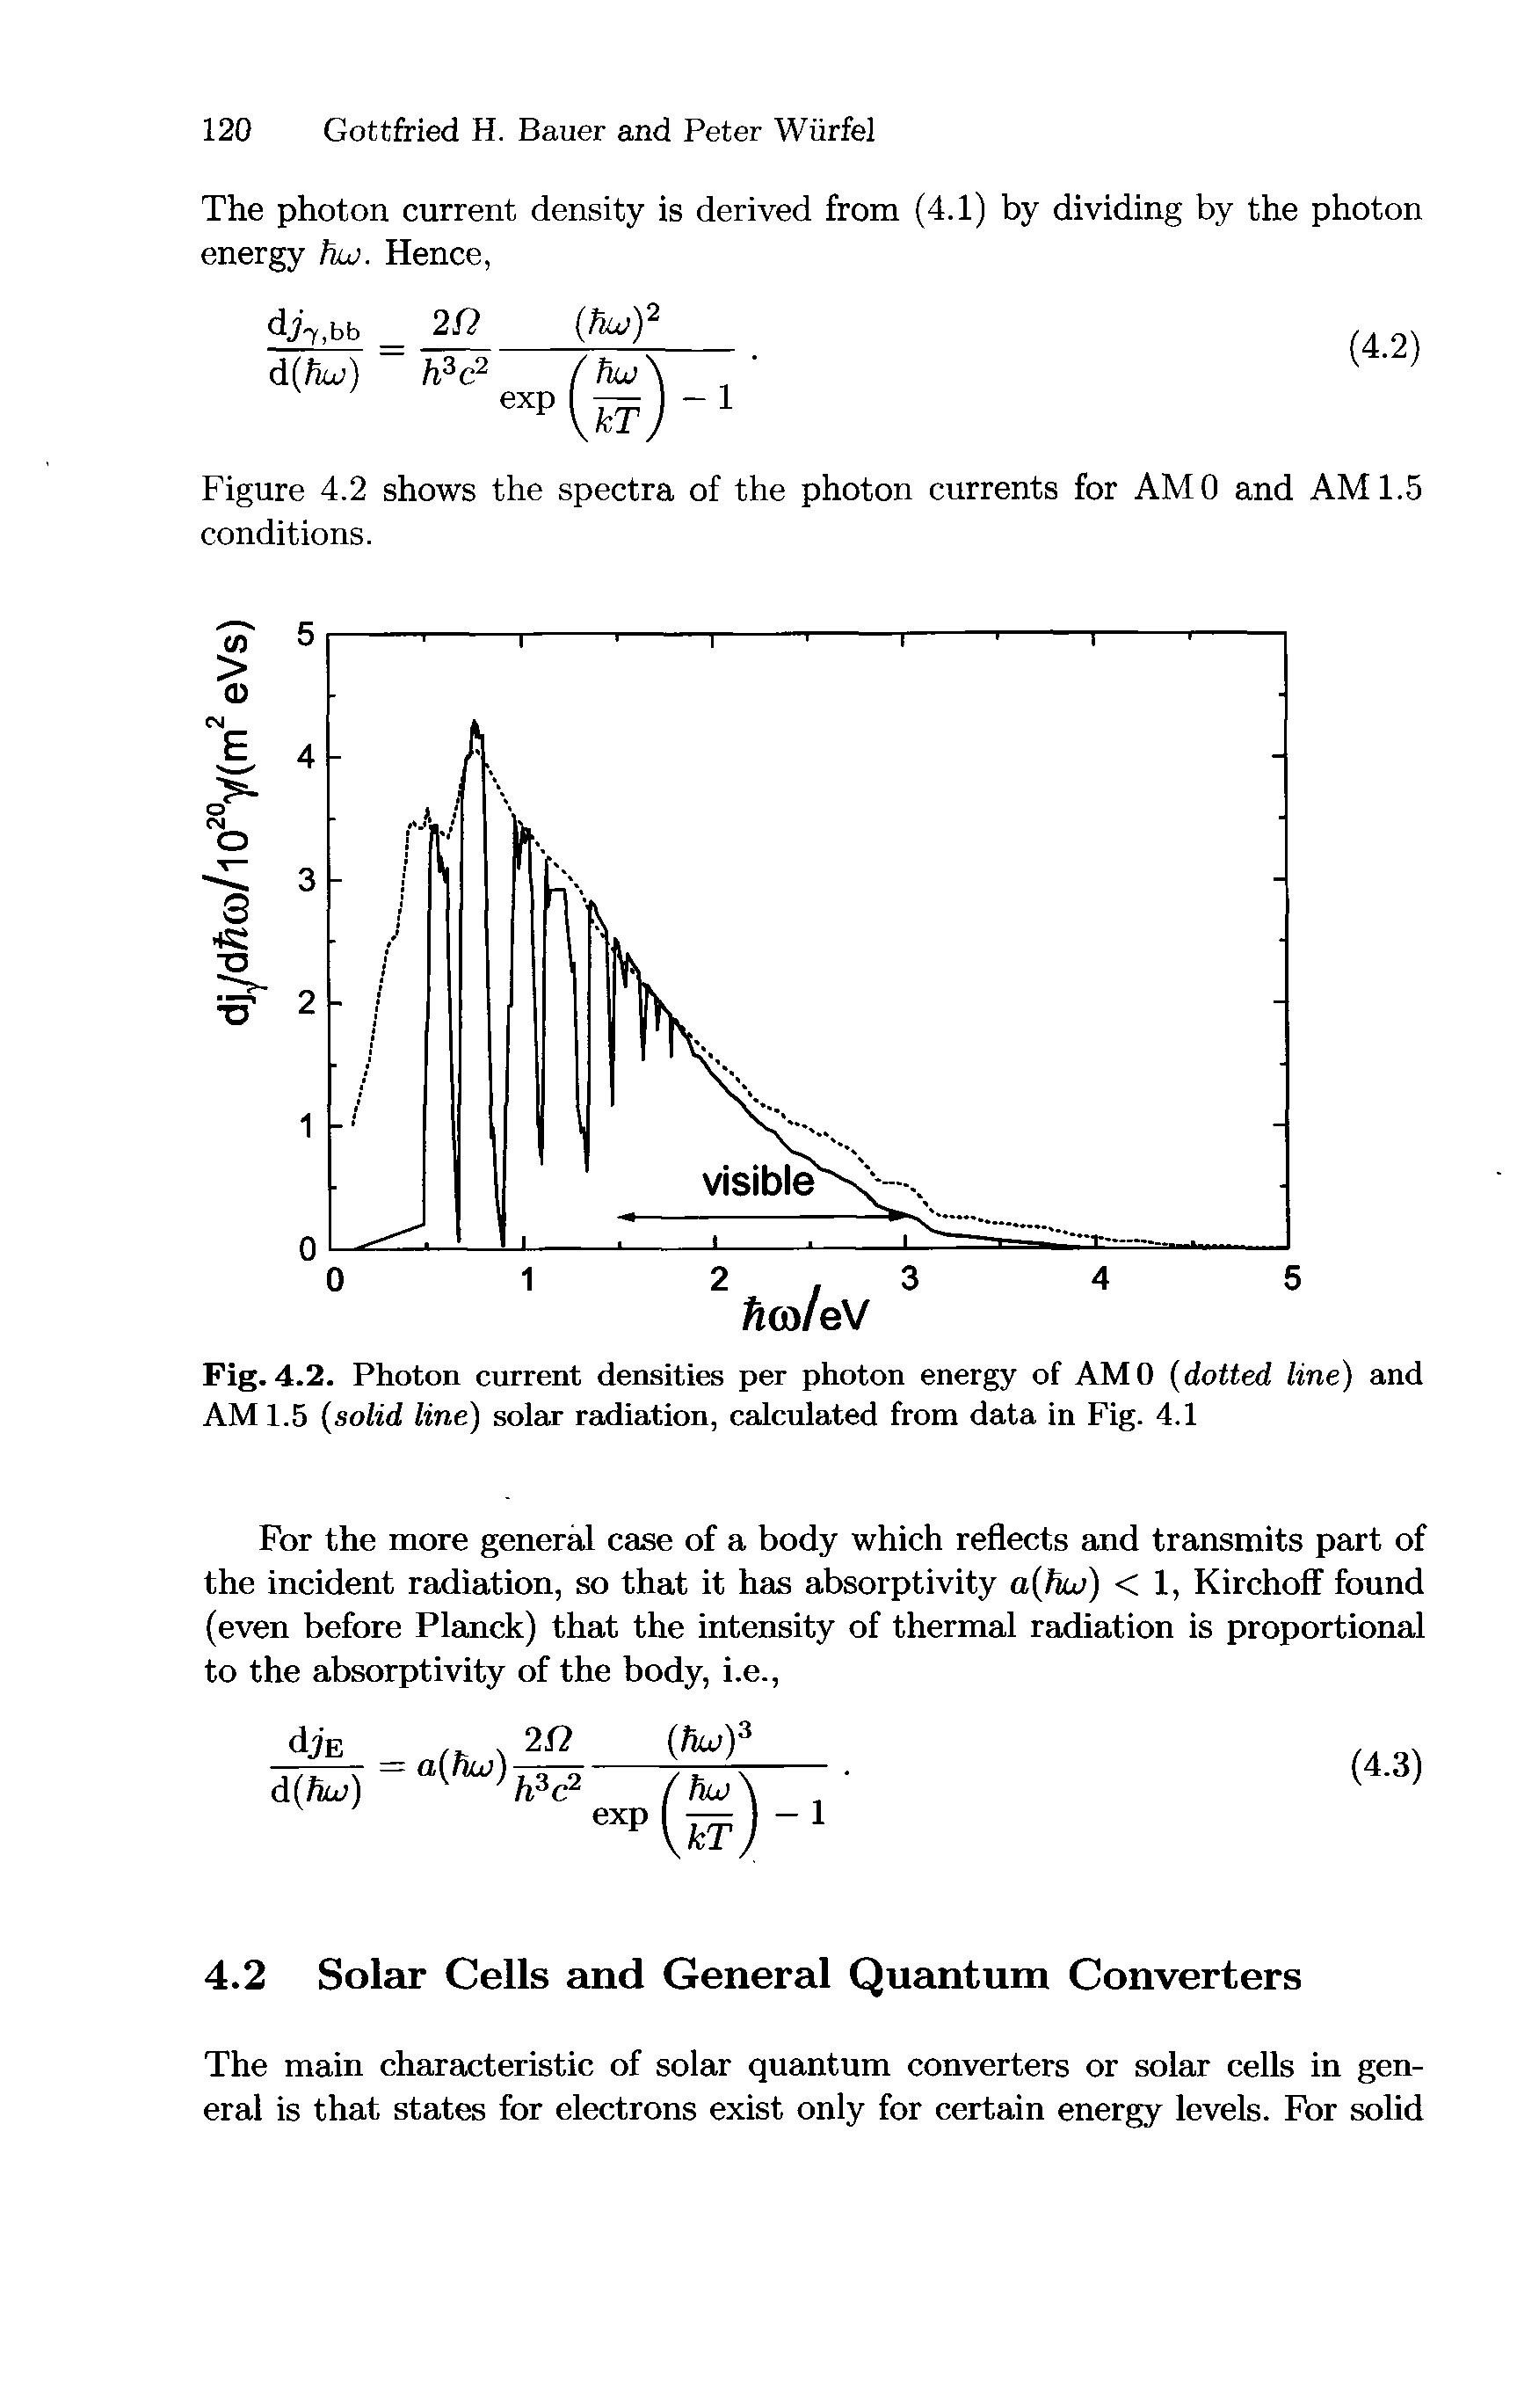 Fig. 4.2. Photon current densities per photon energy of AMO (dotted line) and AM 1.5 (solid, line) solar radiation, calculated from data in Fig. 4.1...